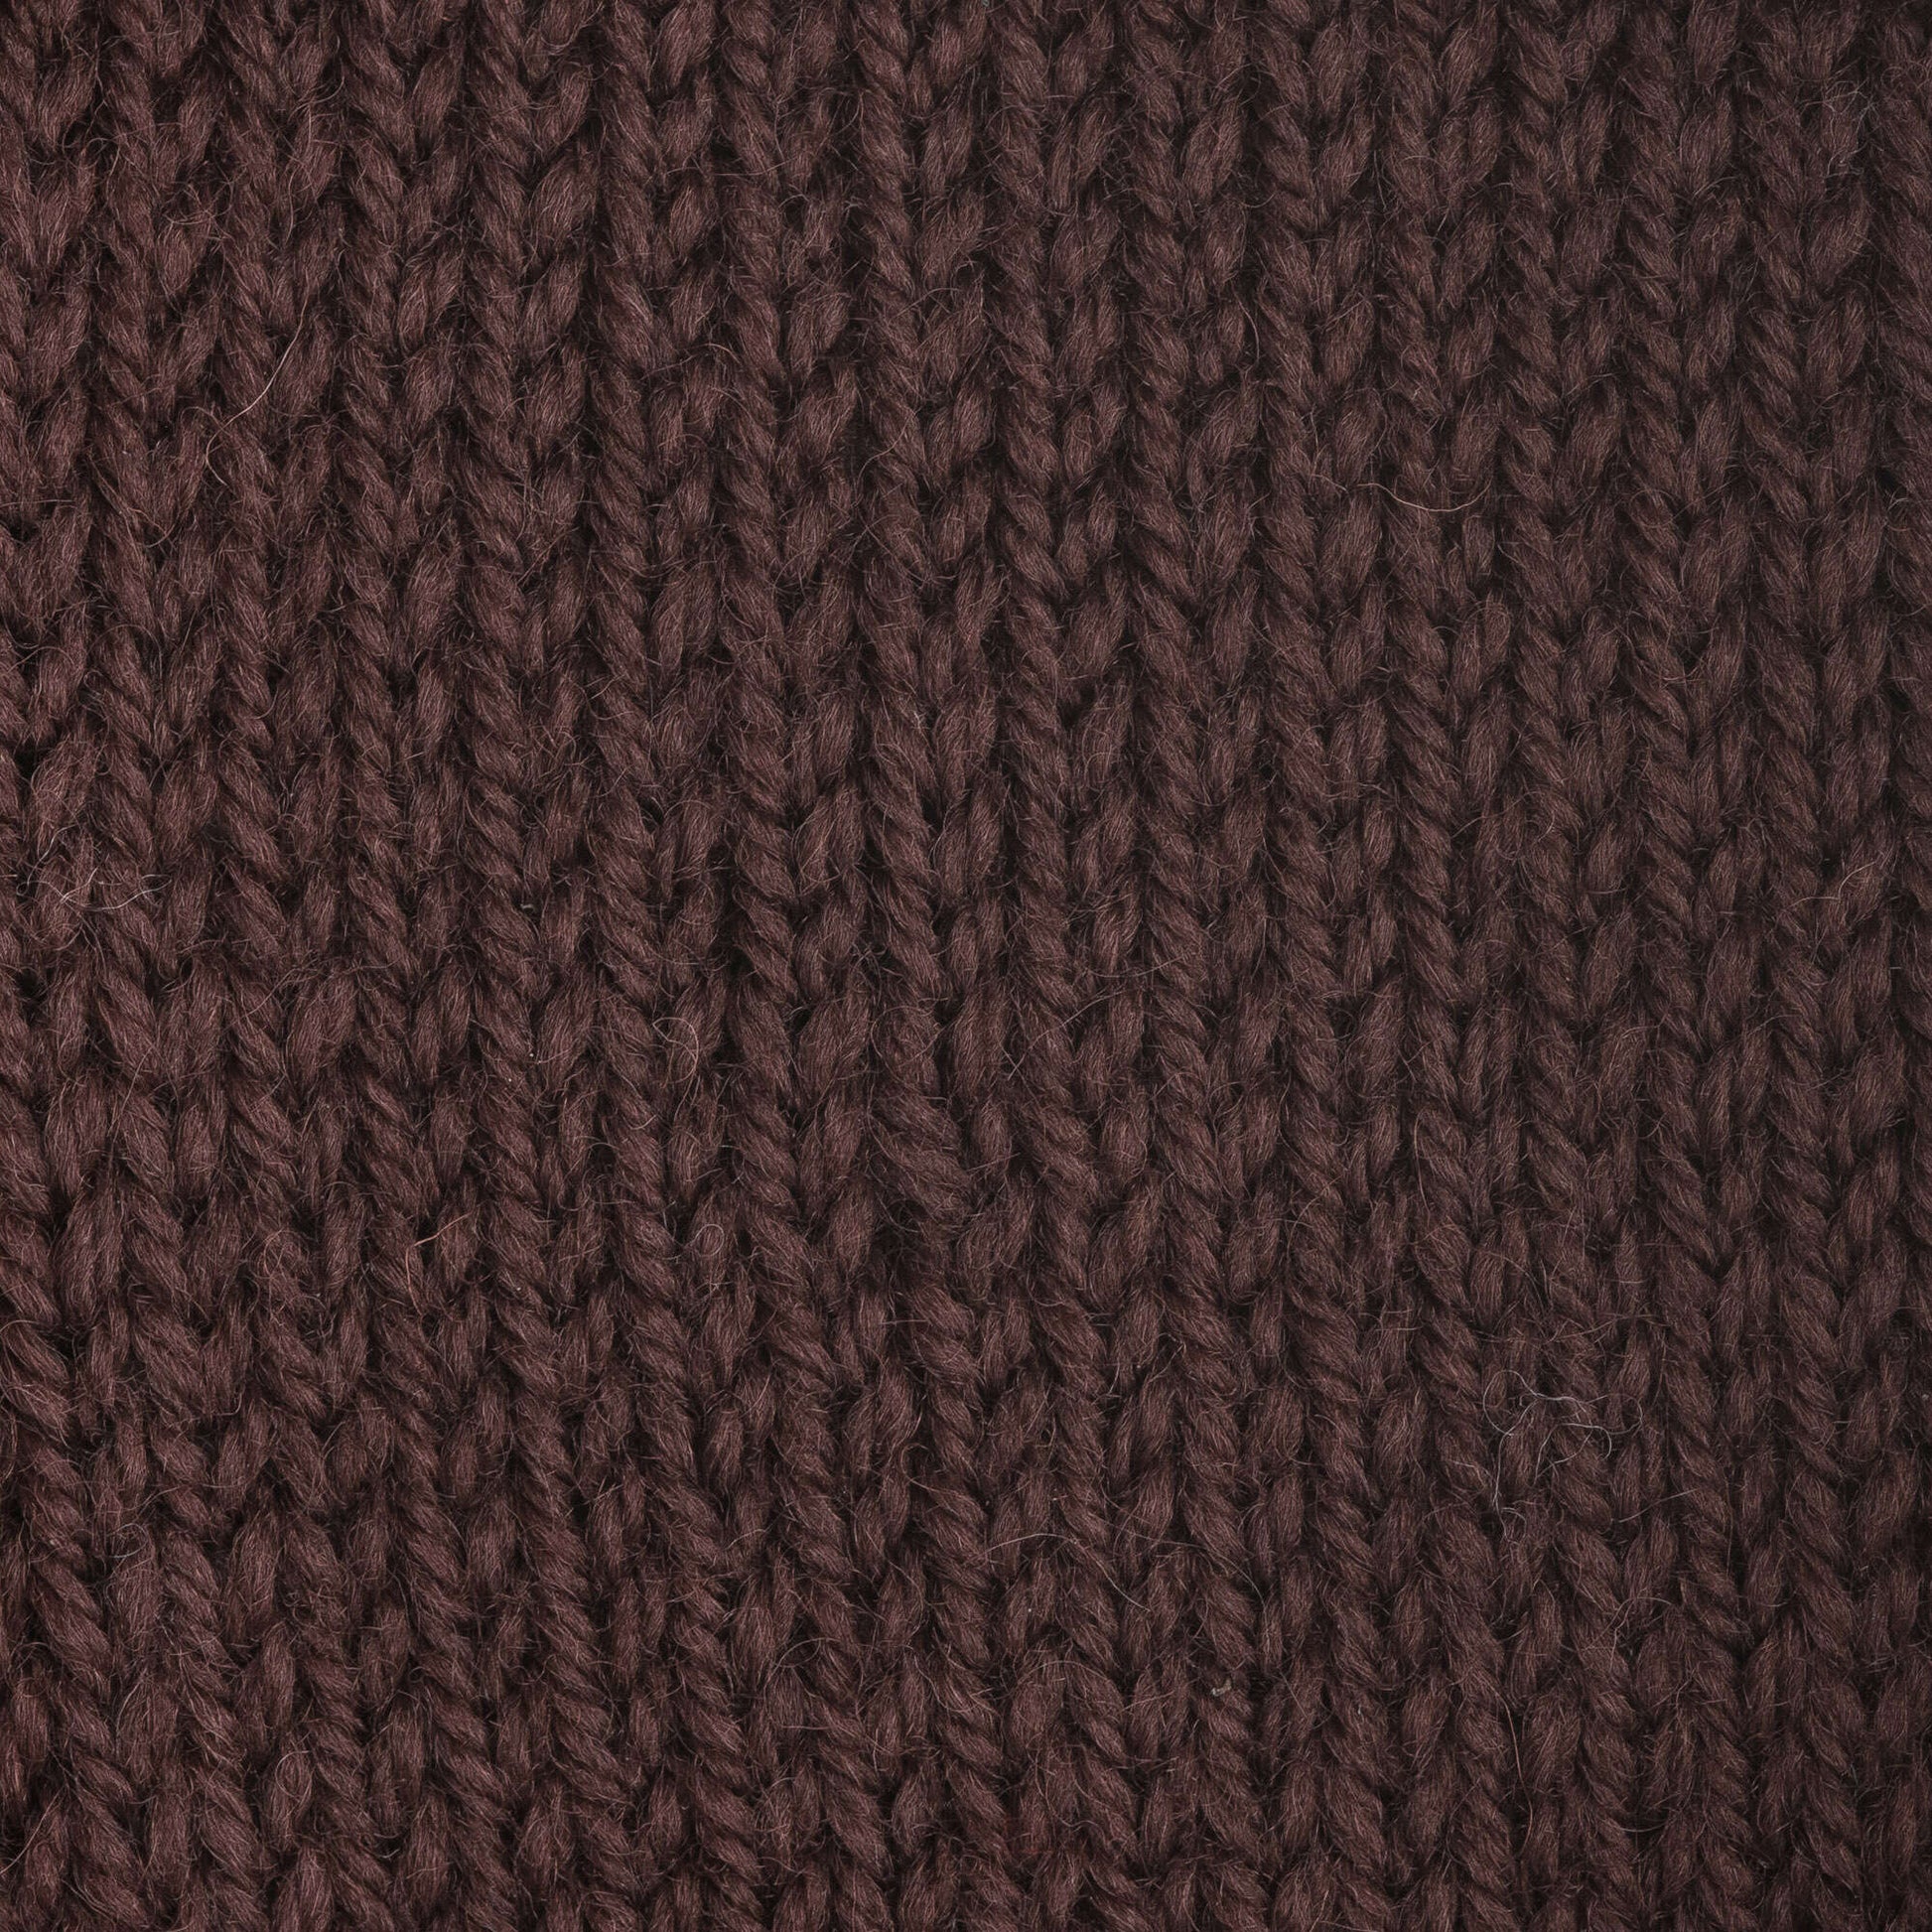 Patons Classic Wool Worsted Yarn - Discontinued Shades Chestnut Brown